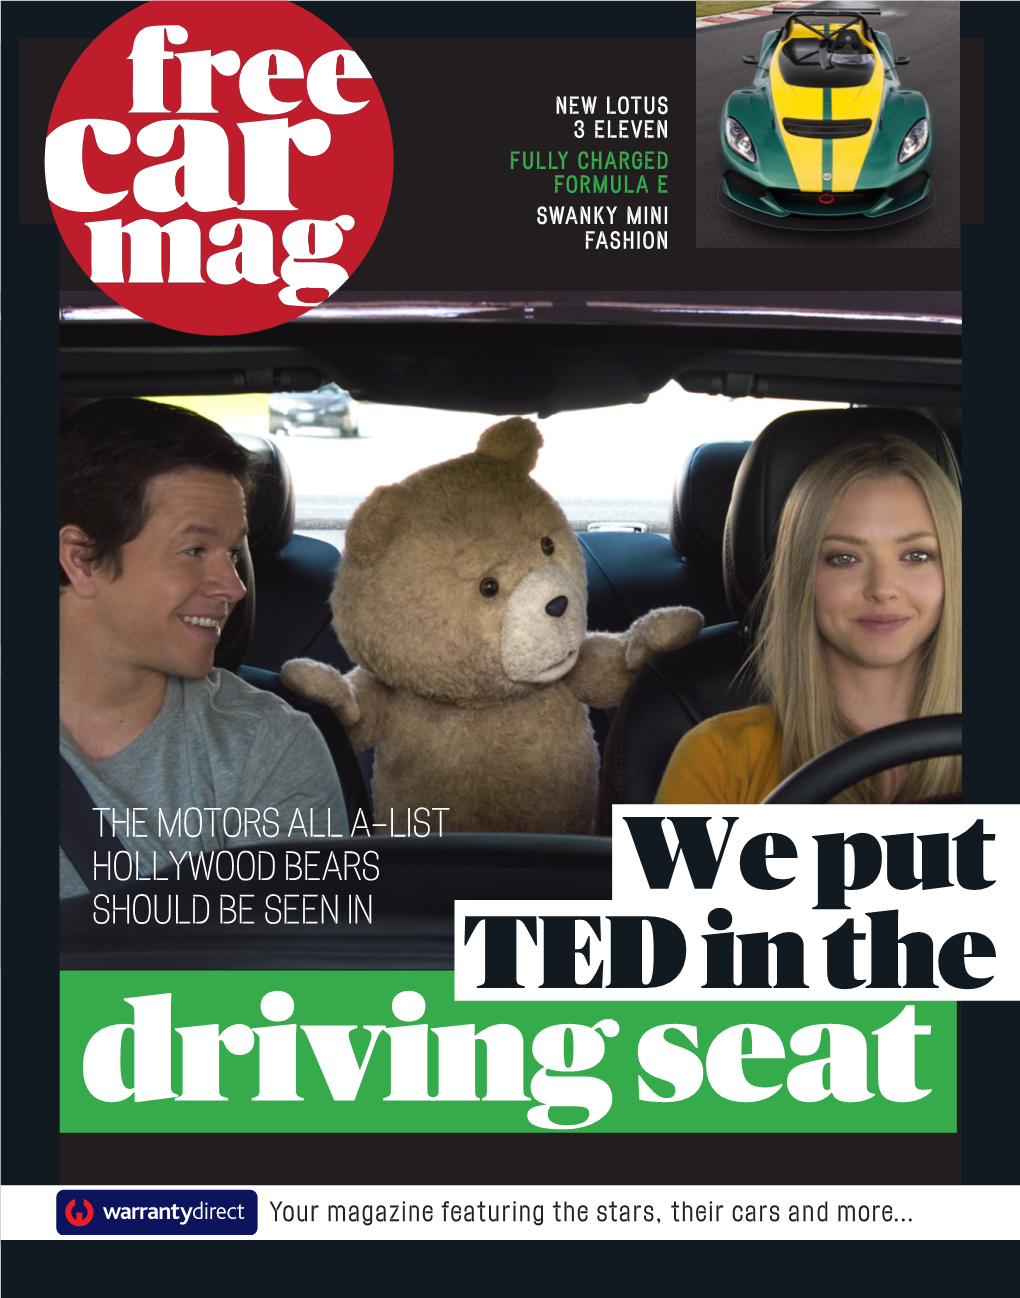 We Put TED in the Driving Seat